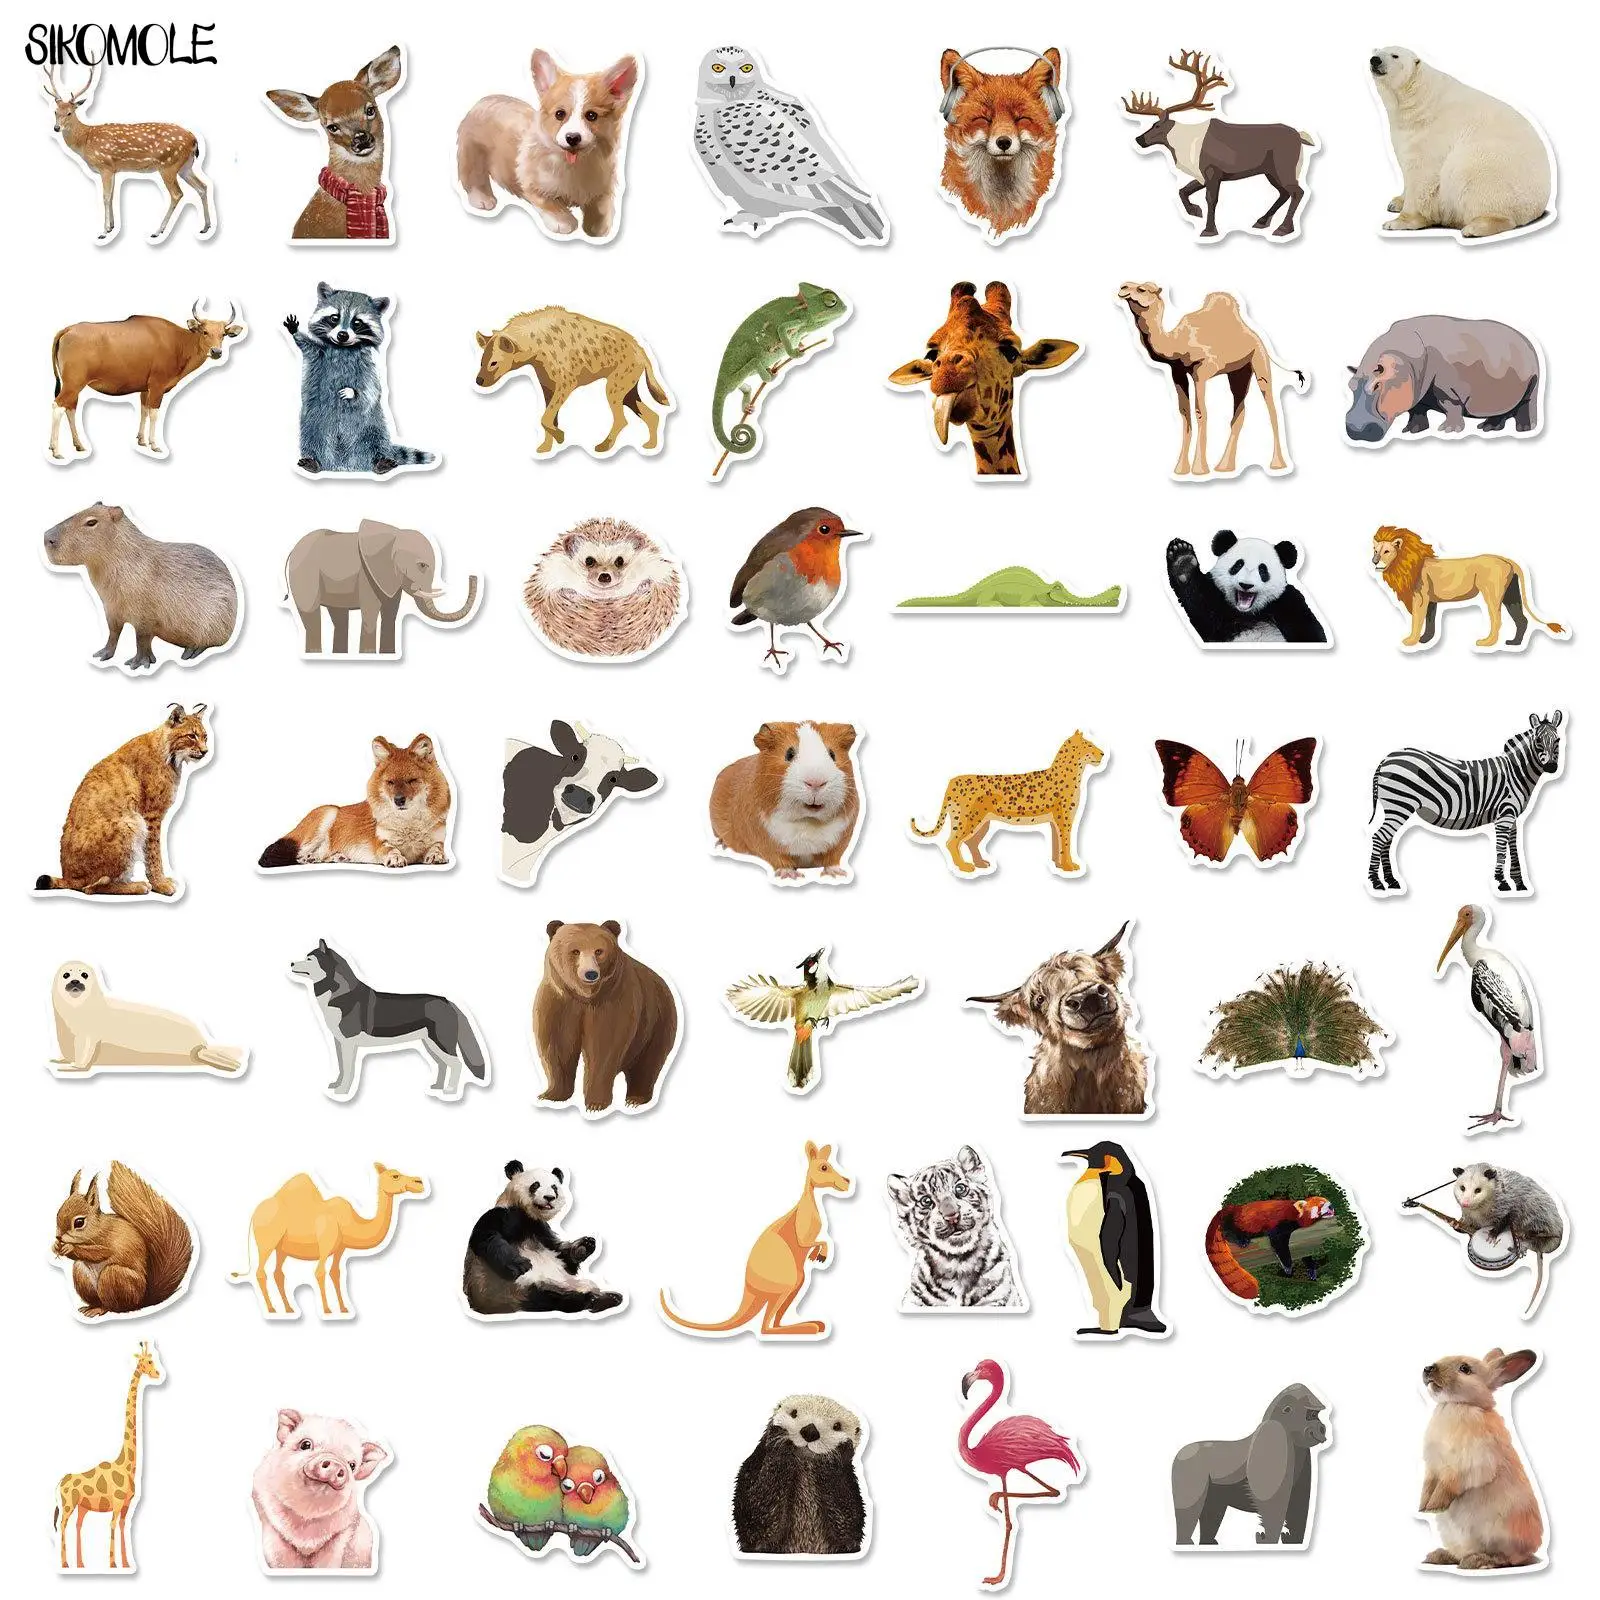 Animal 100 Picwaterproof Animal Stickers 100pcs - Cartoon Zoo Decals For  Laptop & Skateboard